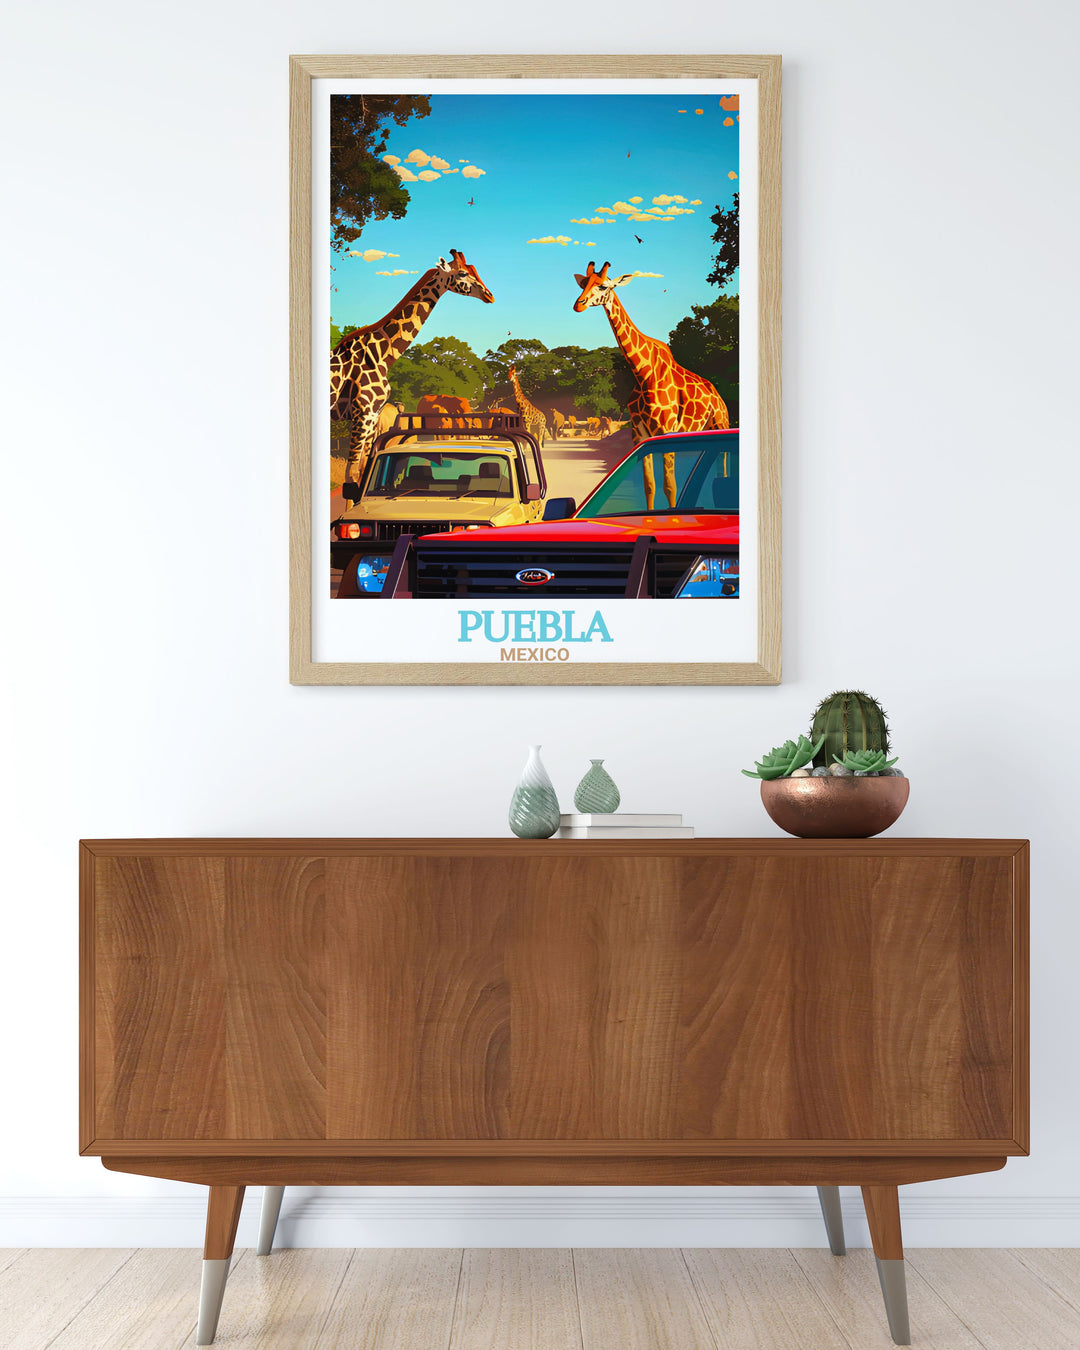 Artistic Puebla Painting highlighting the charm of this beautiful city Africam Safari Stunning Prints showcasing majestic animals in their natural environment perfect wall decor for anyone who appreciates culture and nature